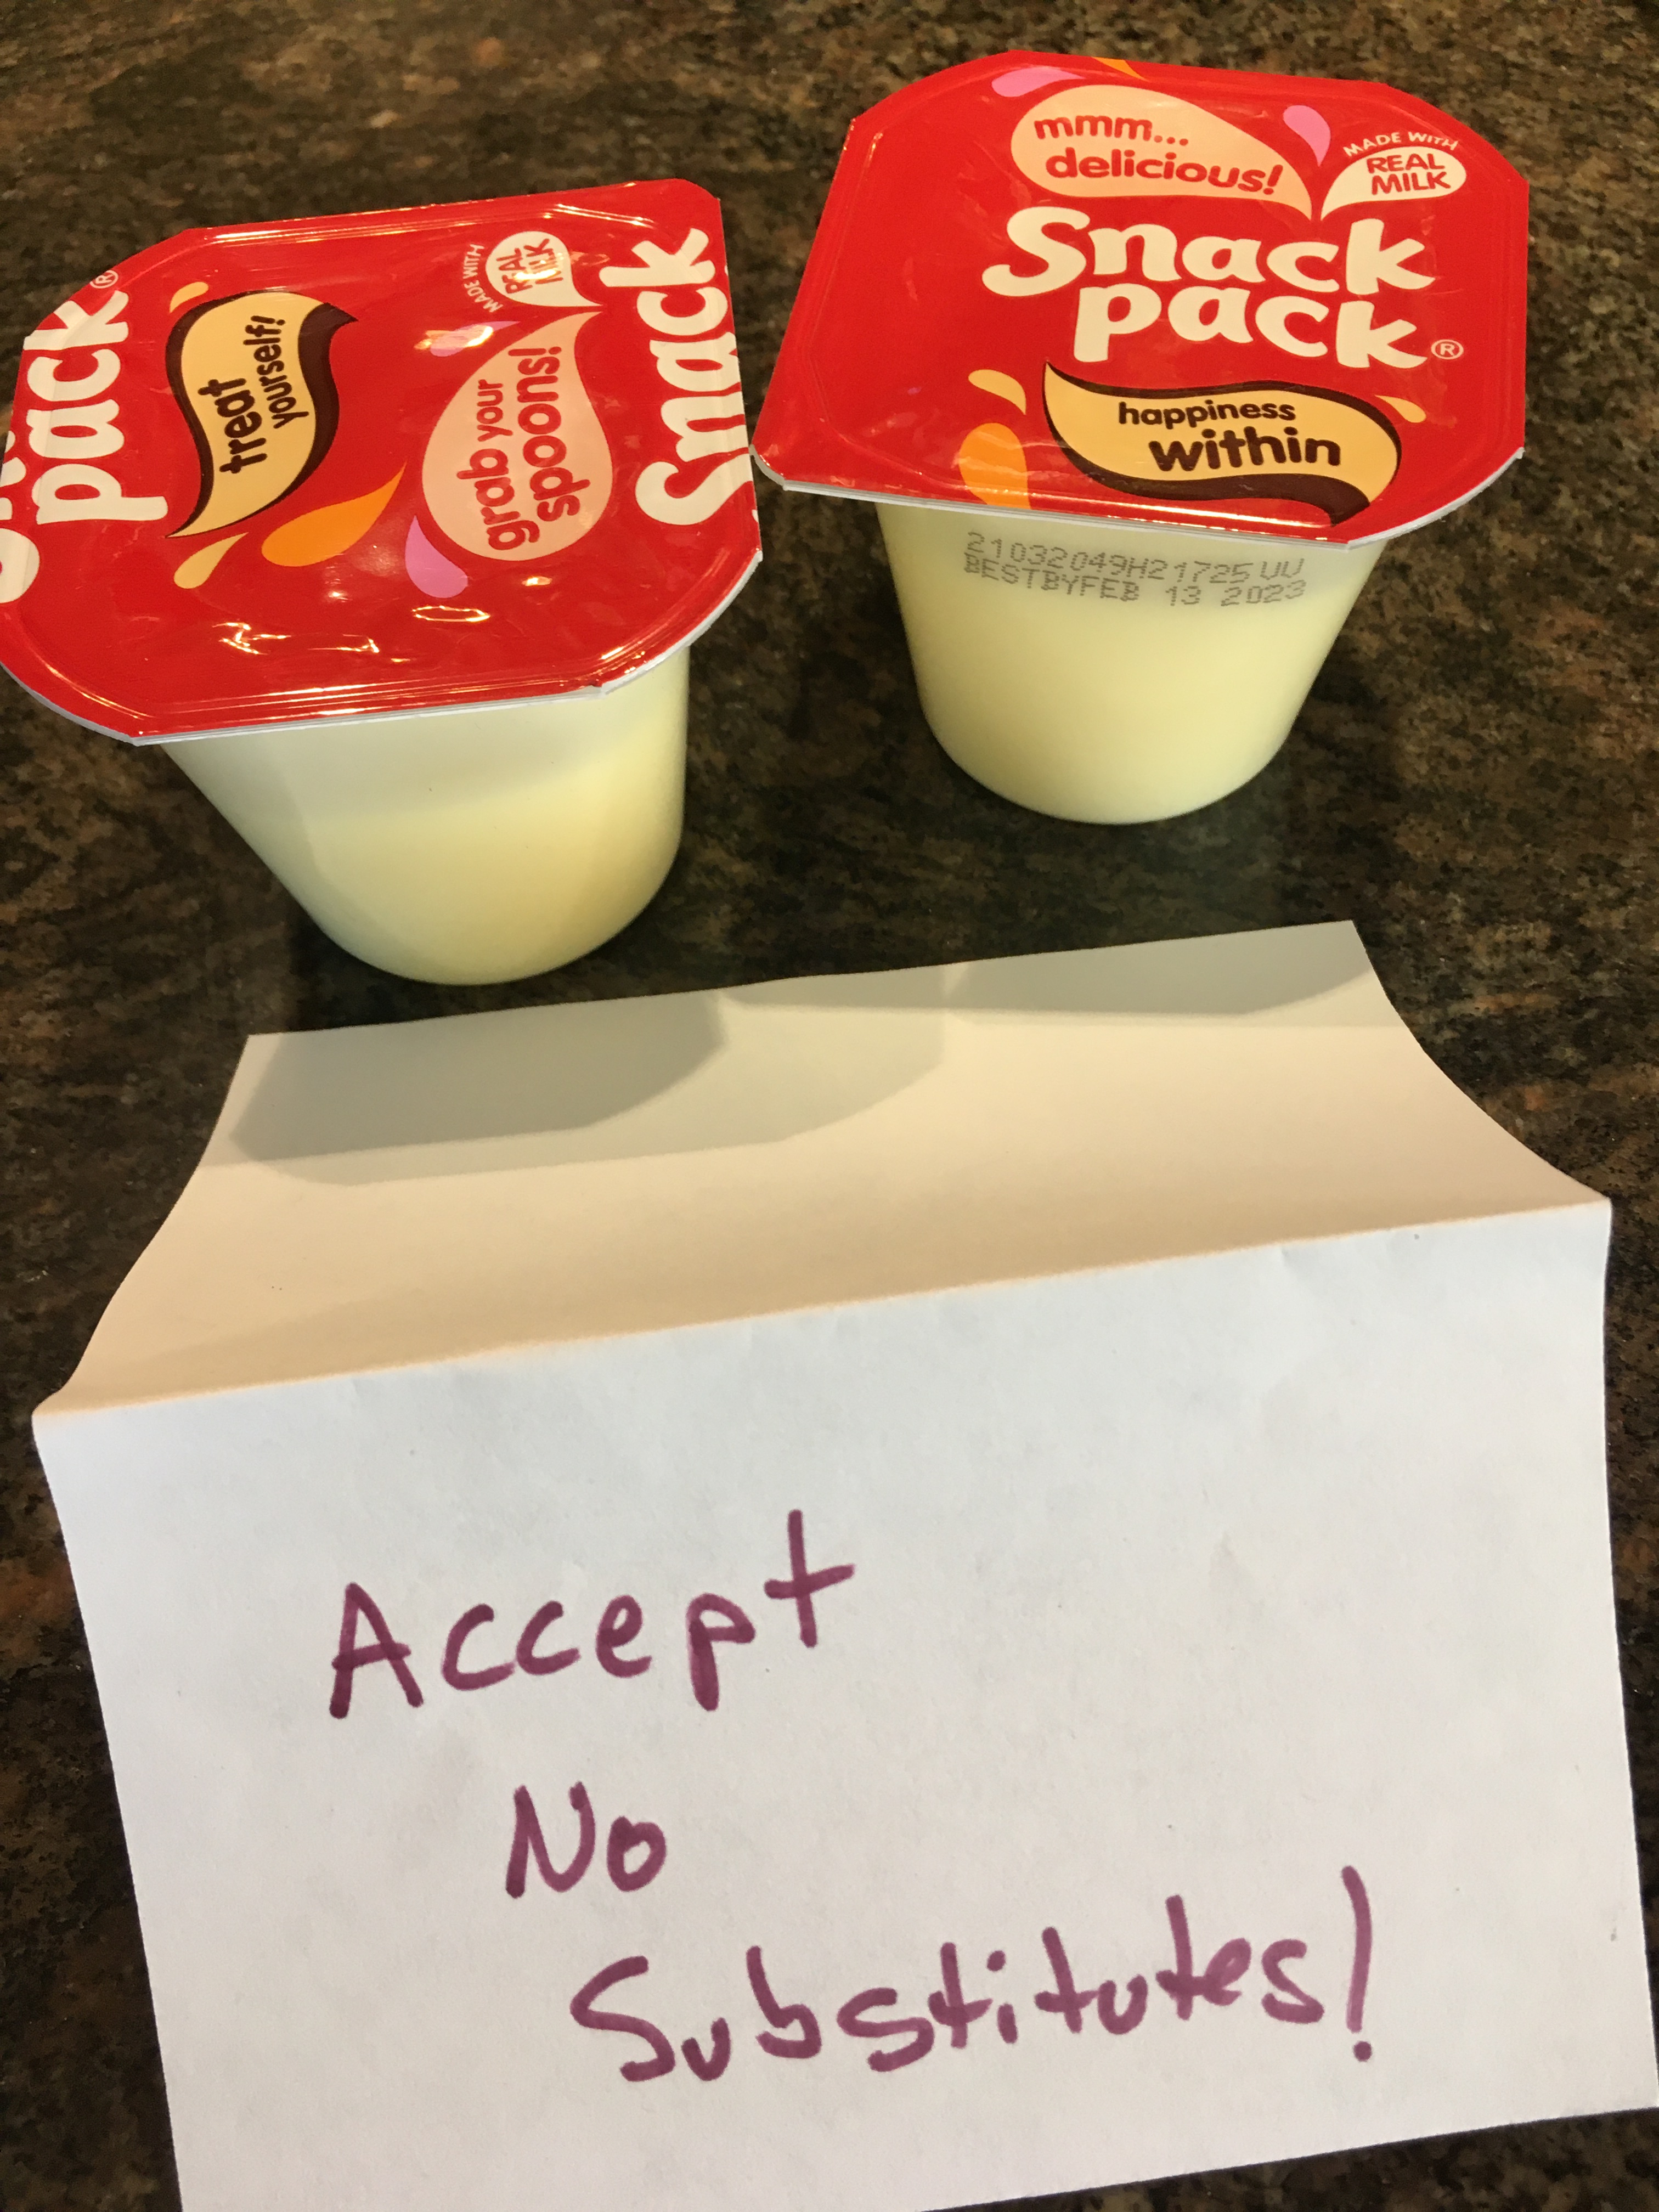 Photo of two individual serving Snack Pack vanilla pudding cups, with a hand-made sign in front of them reading "Accept No Substitutes!"